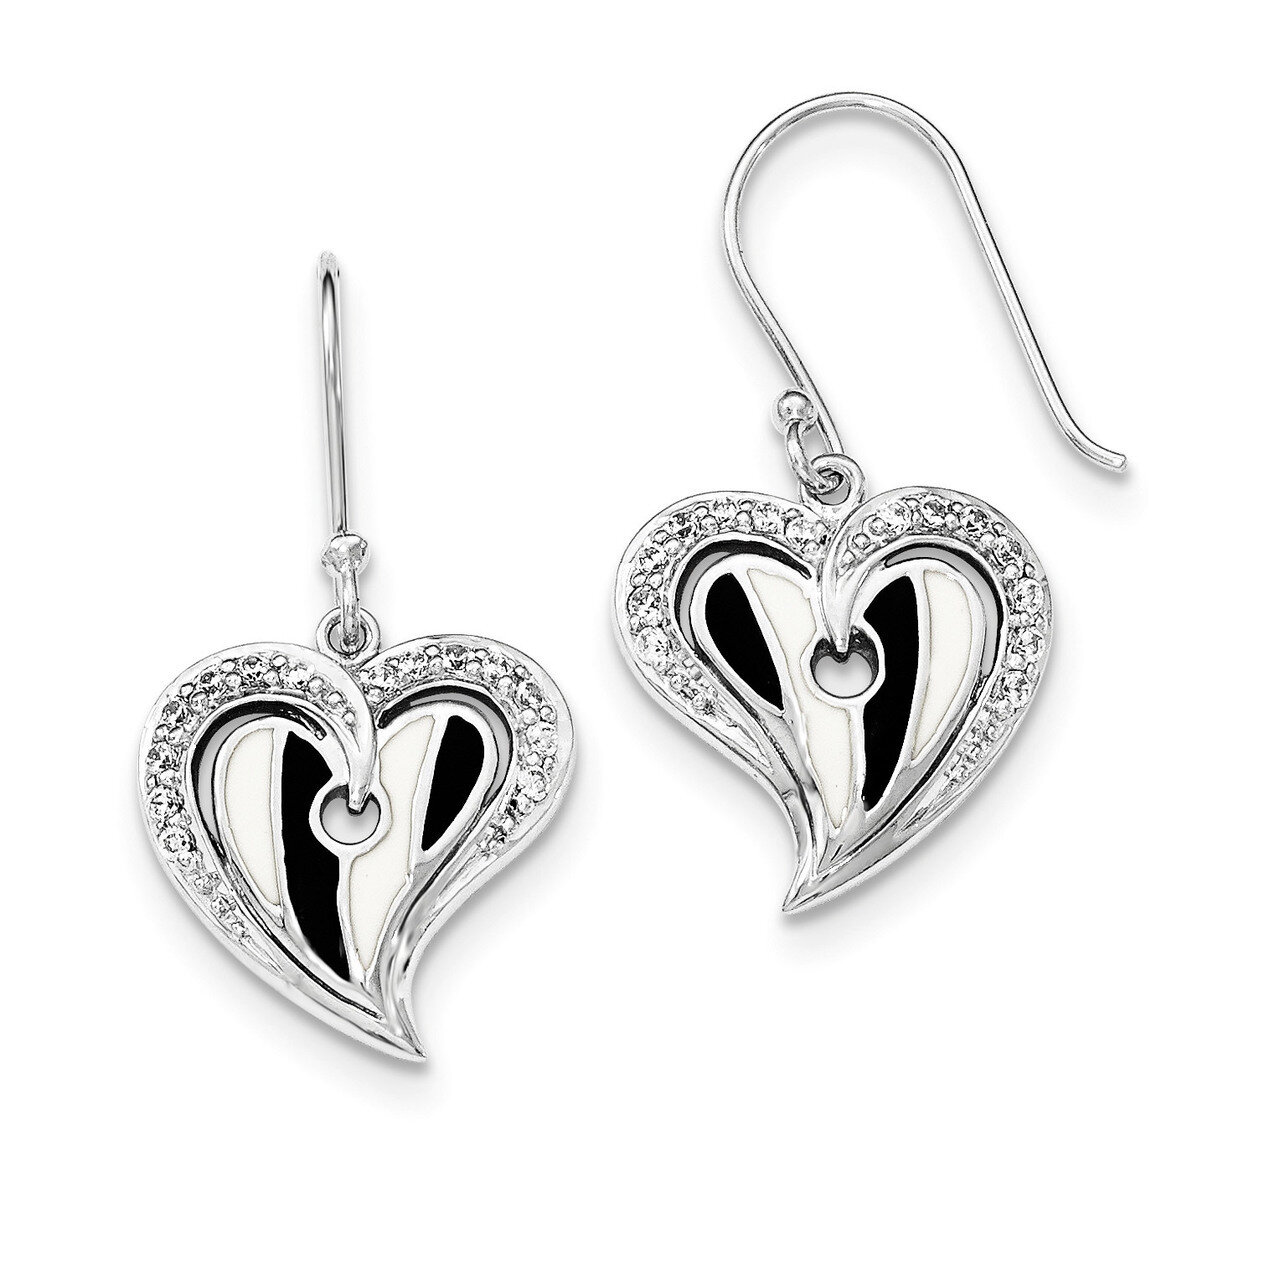 Polished Heart With Black And White Enamel CZ Earrings Sterling Silver QE12491